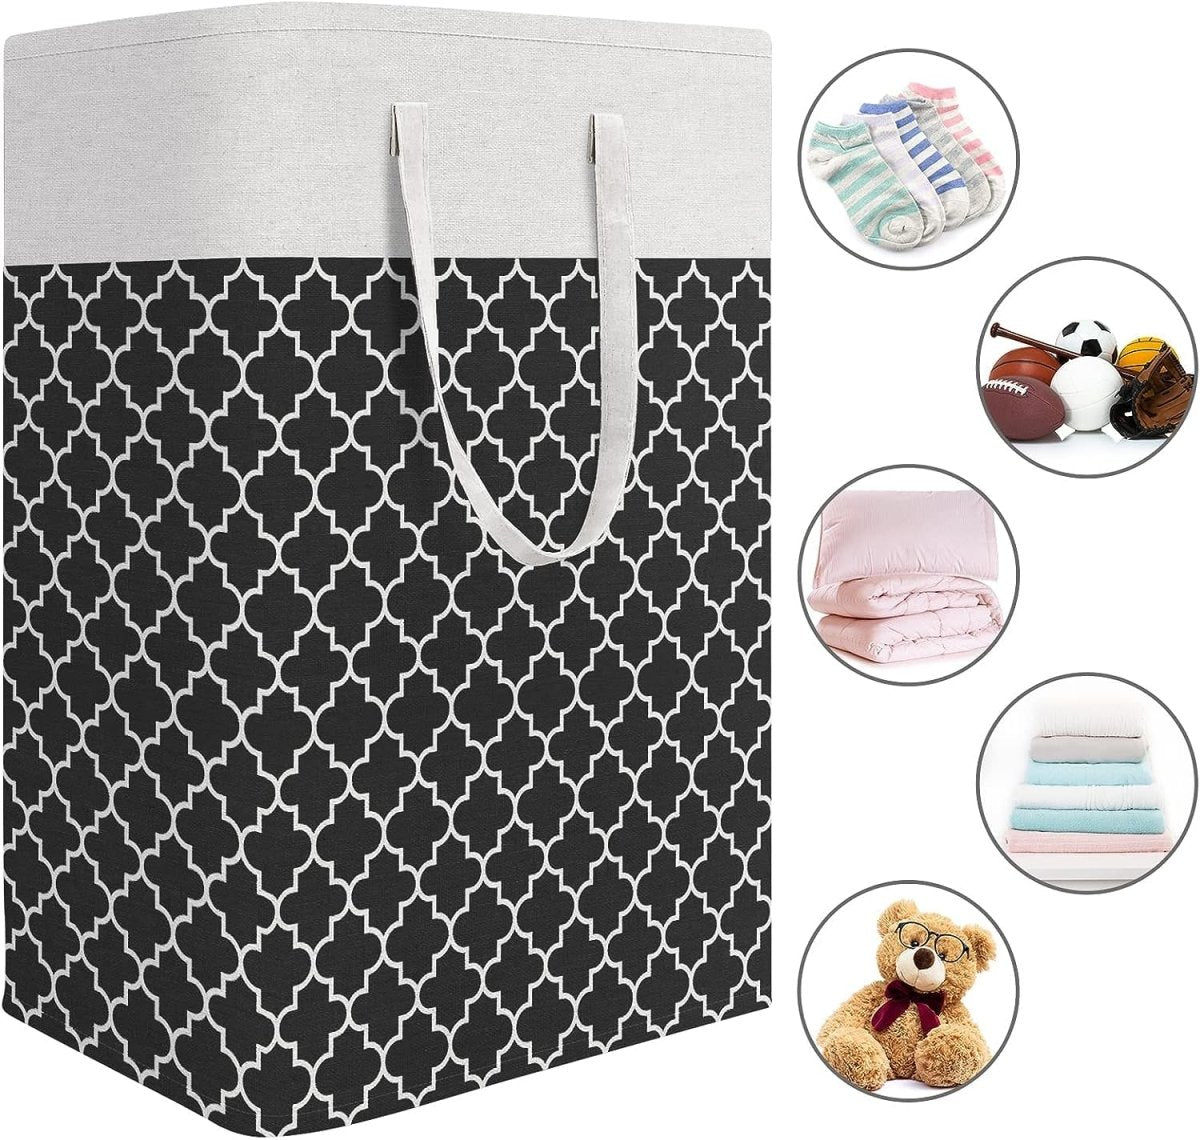 Laundry Baskets with Long Handles, Collapsible Waterproof Clothes Hamper Laundry Bag- #Royalkart#clothes basket